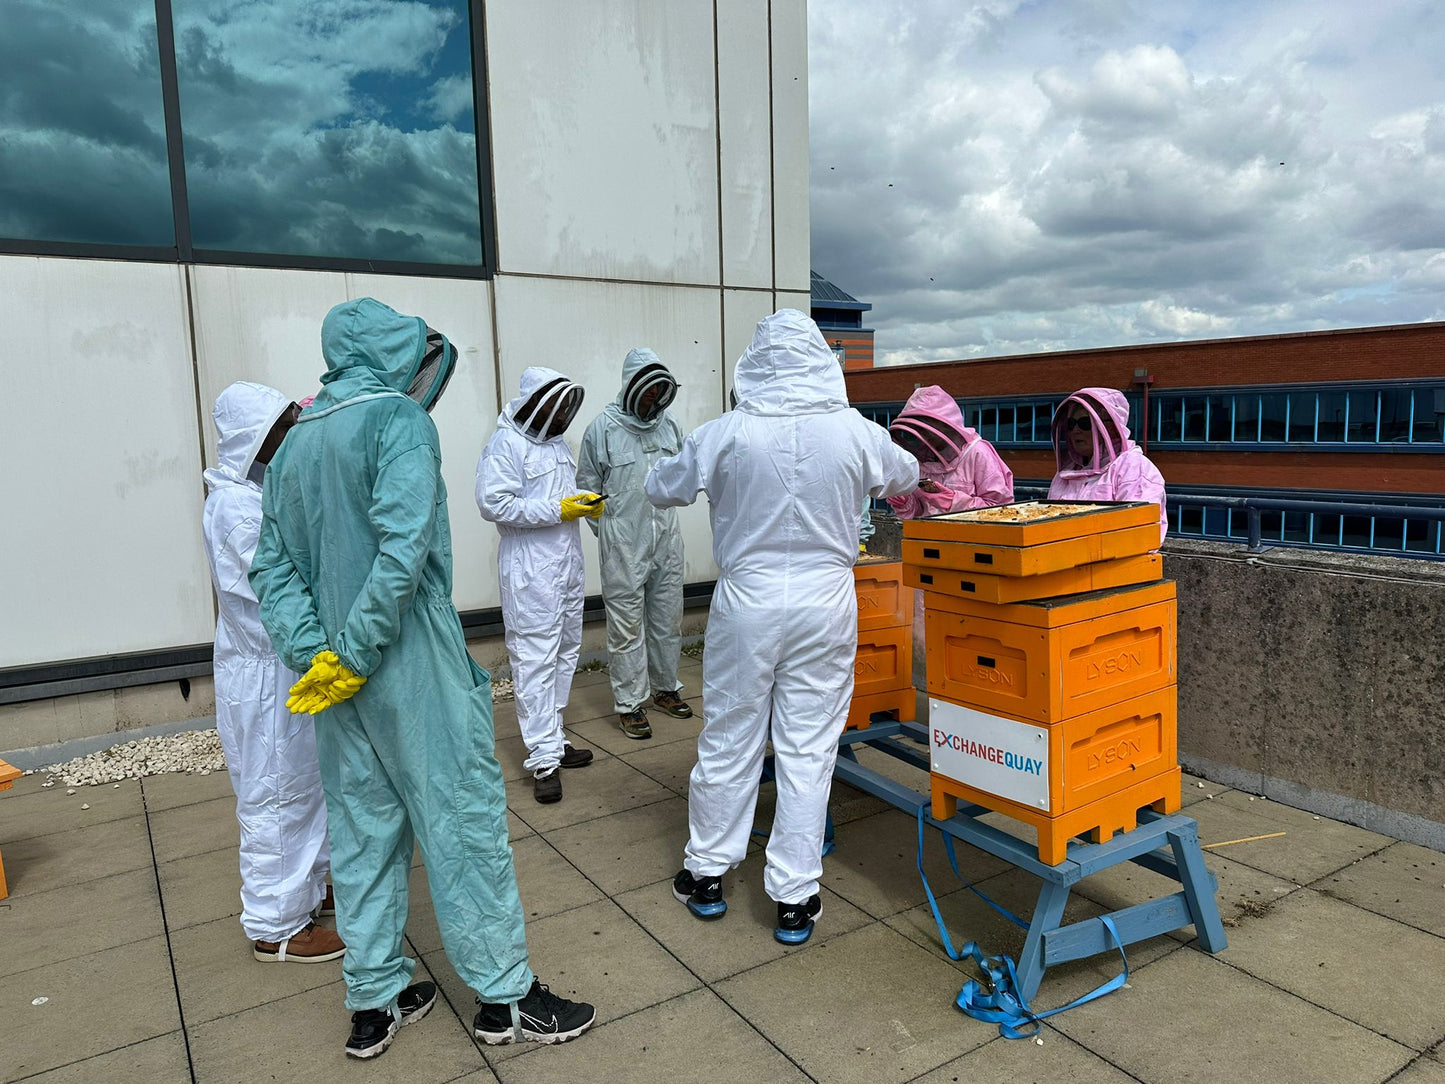 Beekeeping Experience Sheffield - Full Day